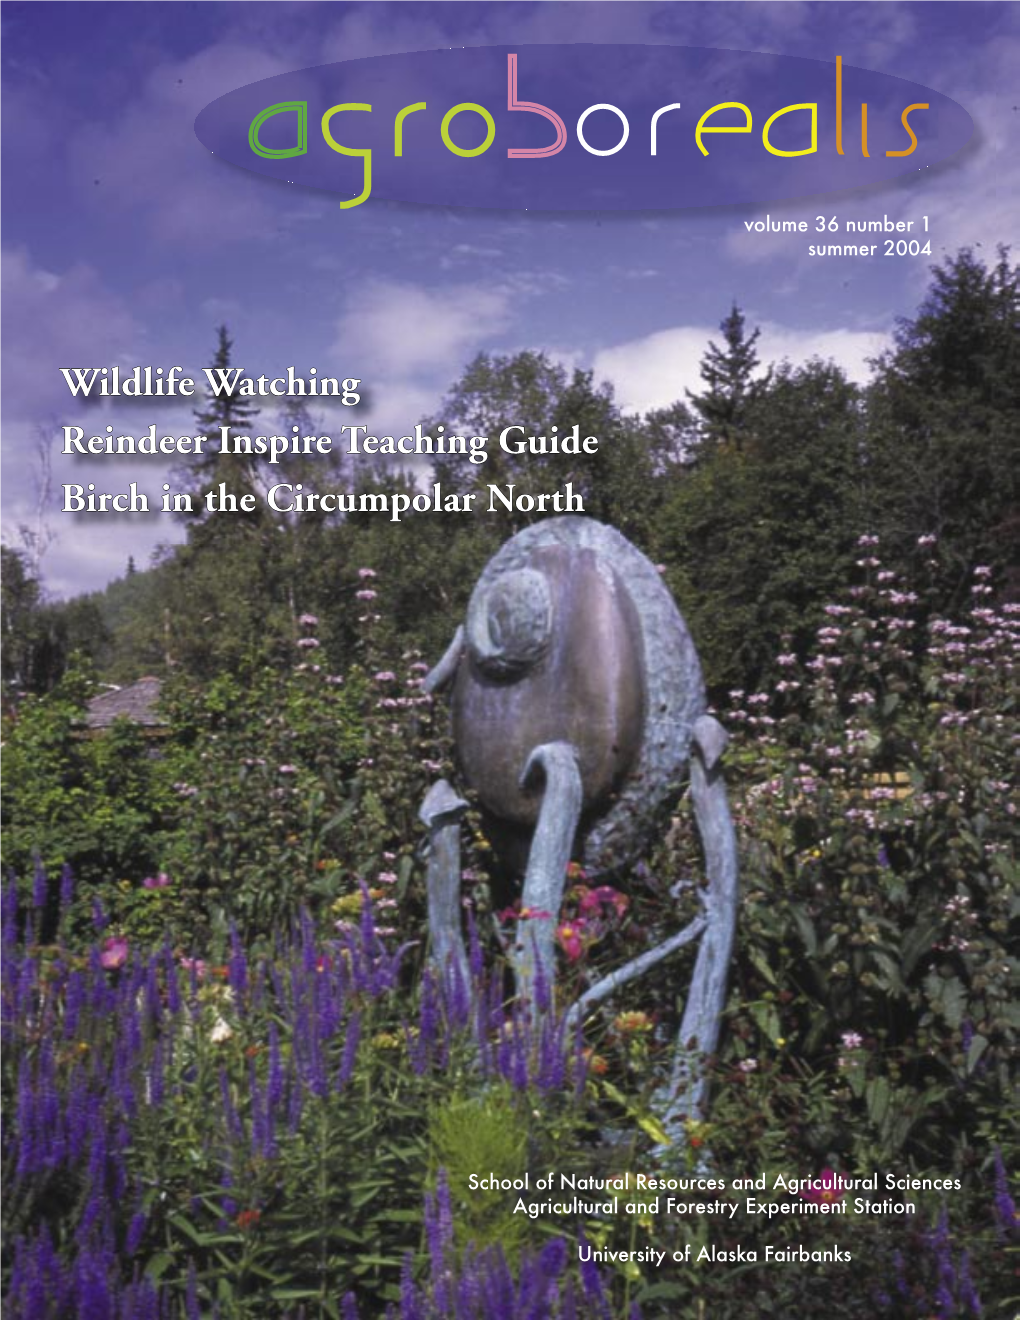 Agroborealis Is Published by the Alaska Letterletter Ffromrom Tthehe Ddeanean Aandnd Agricultural and Forestry Experiment Station, University of Alaska Fairbanks